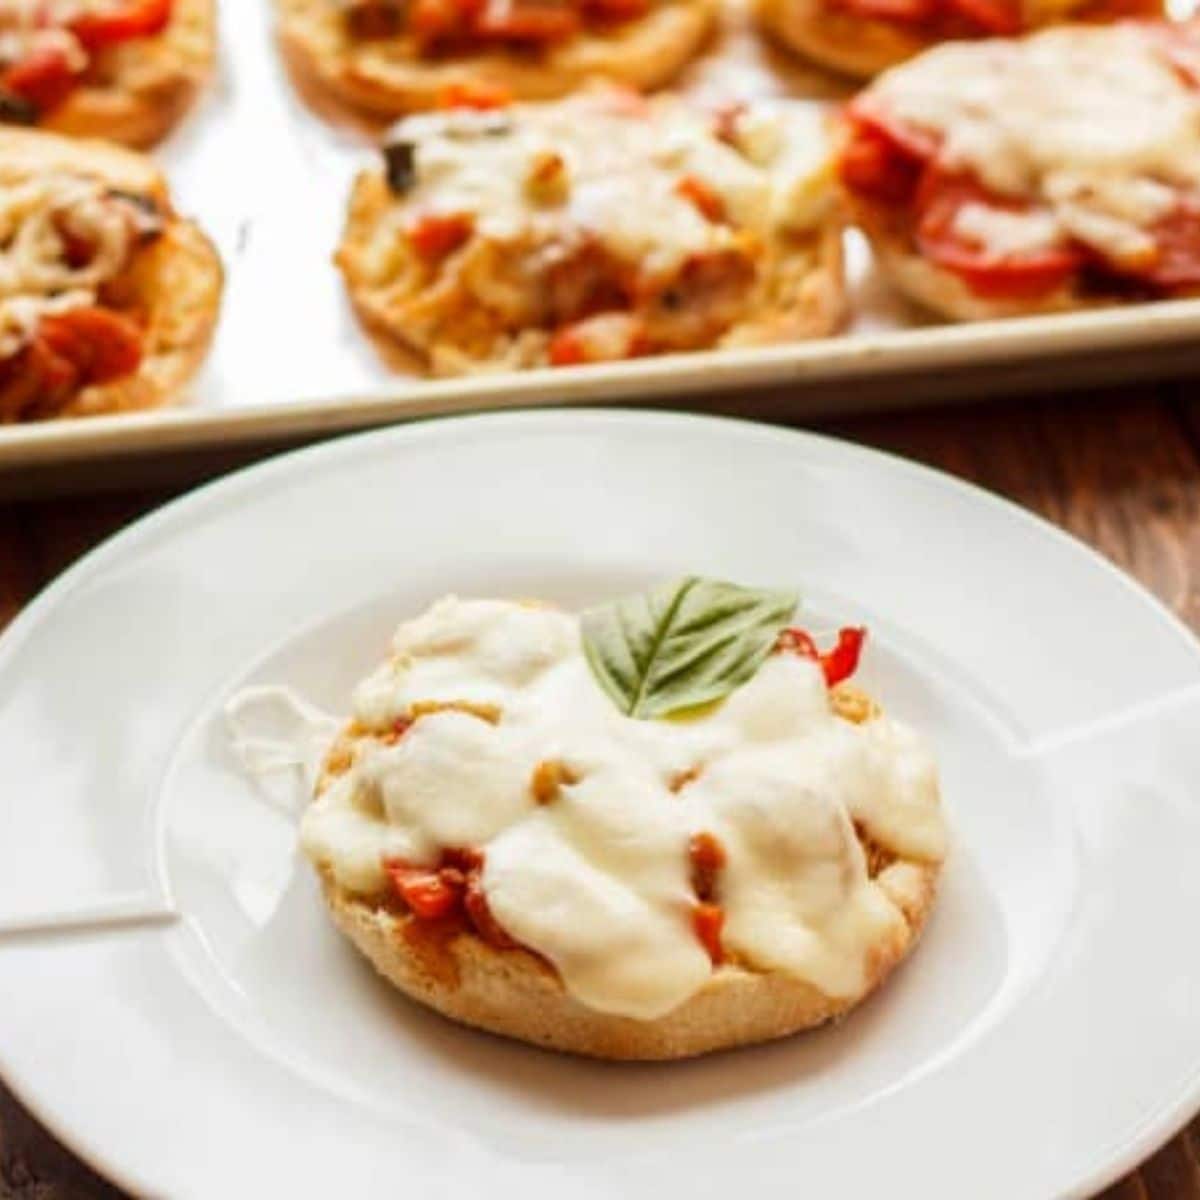 https://thecookiewriter.com/wp-content/uploads/2014/04/Mini-Pizzas-on-English-Muffins-featured.jpg